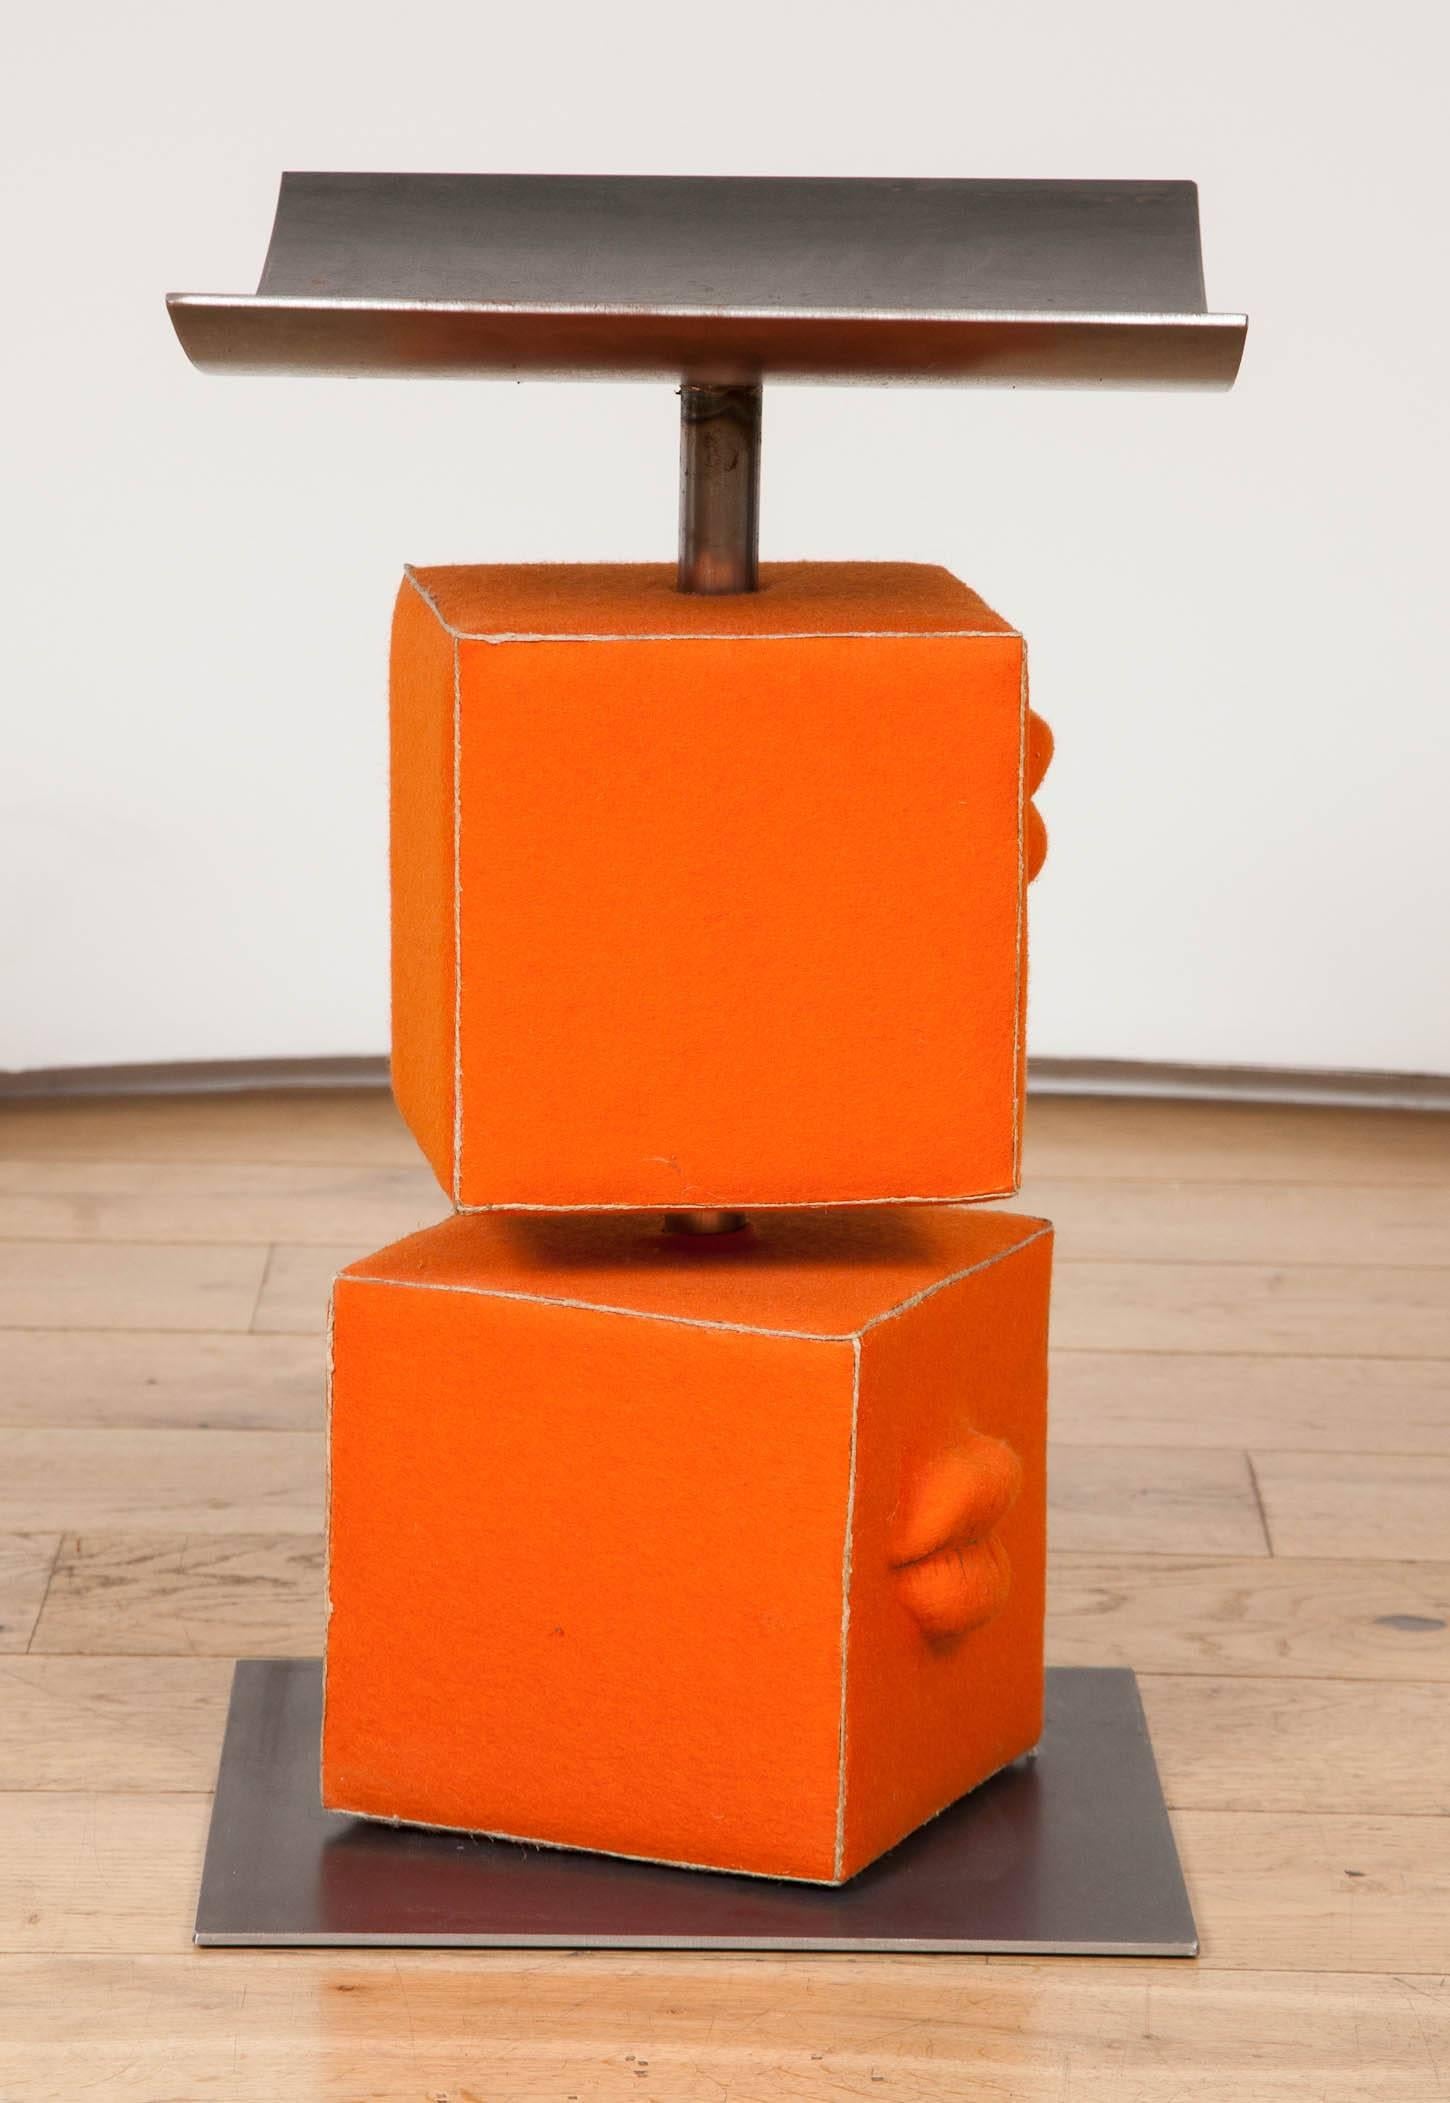 Limited Edition 'Besos' Stool by Françoise Weill In Good Condition For Sale In London, GB